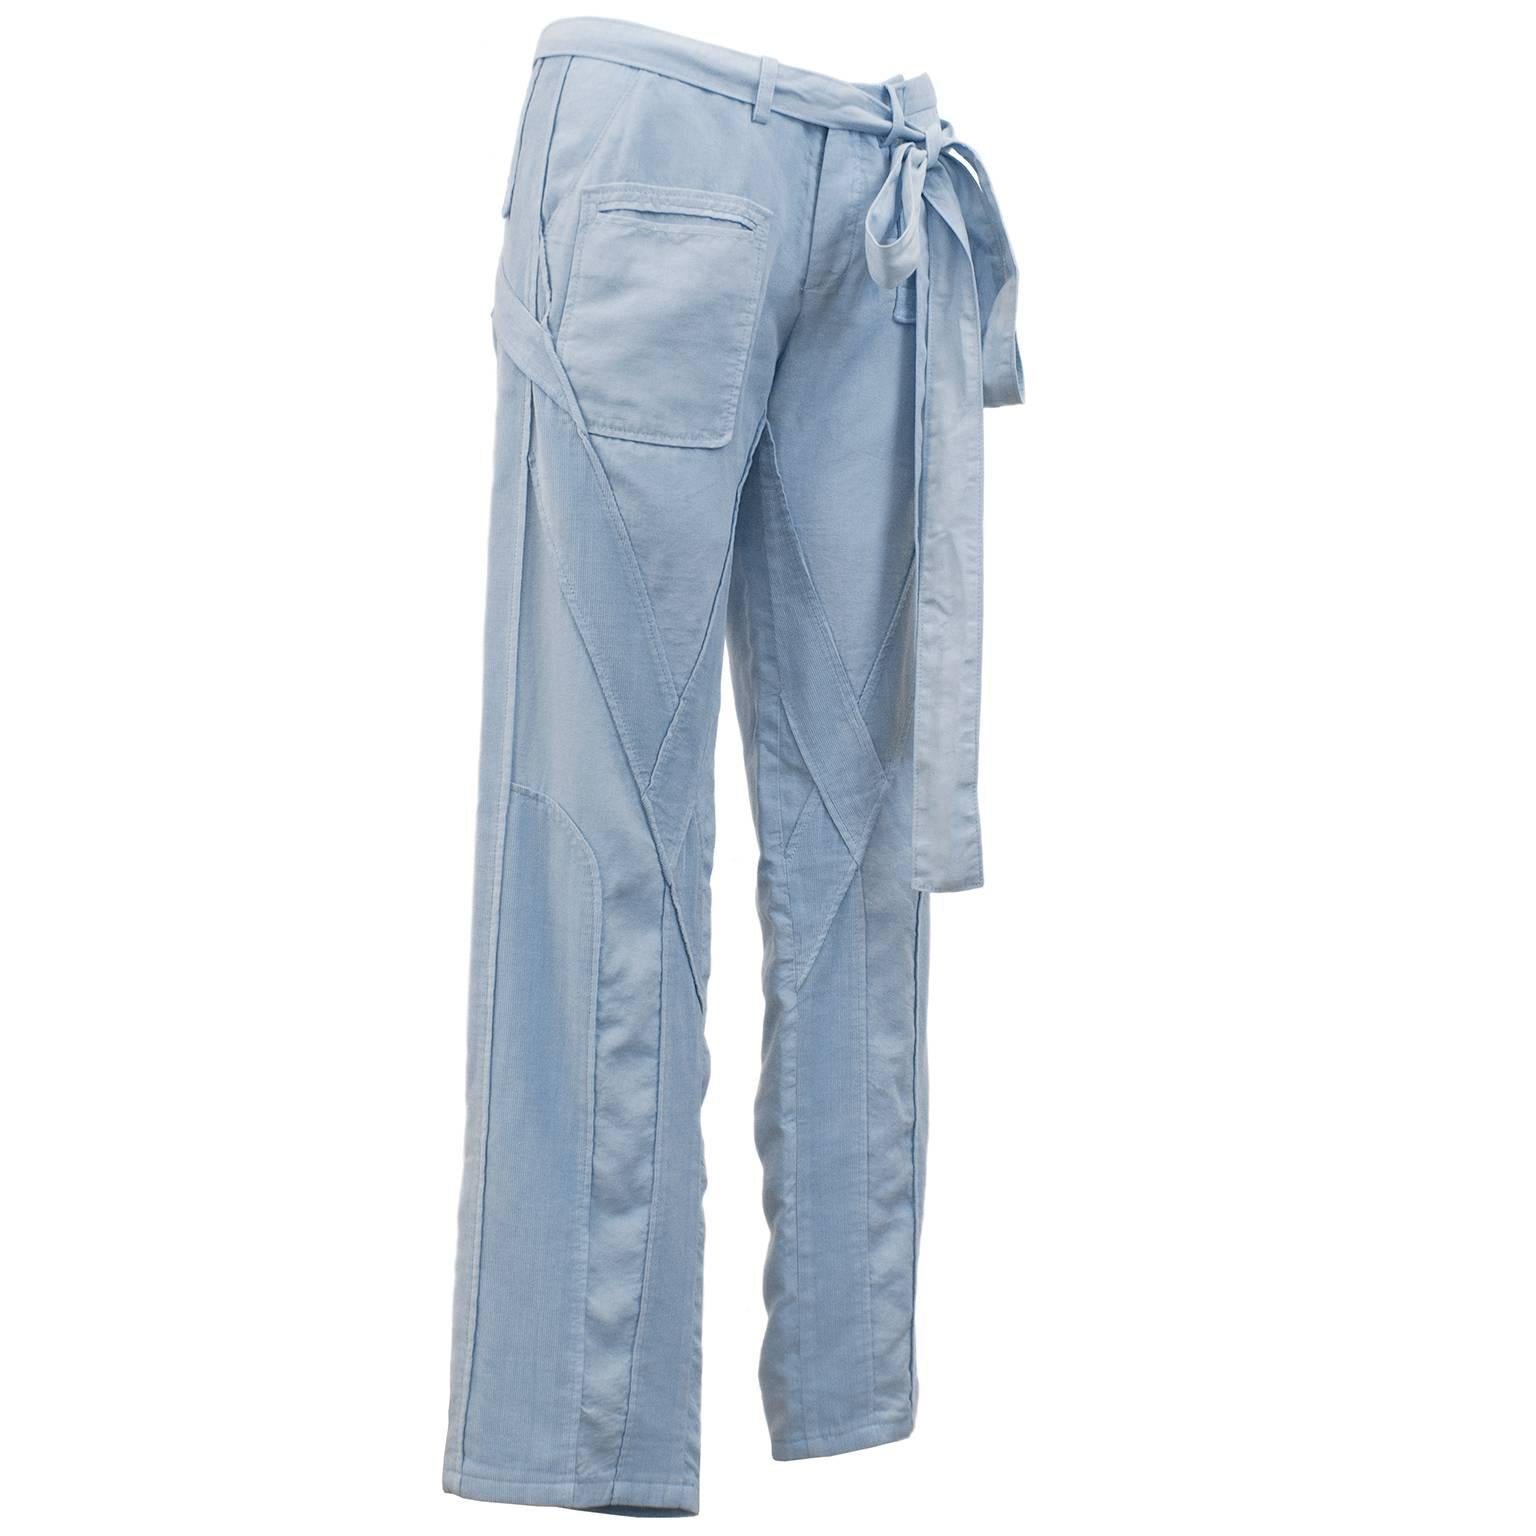 Iconic Balenciaga by Nicolas Ghesquière cargo pants from the spring 2002 runway collection featuring sky blue cotton fabric with corduroy detailing along pant leg, sash tie at waist and button closure. Collectors piece from Ghesquière's early years